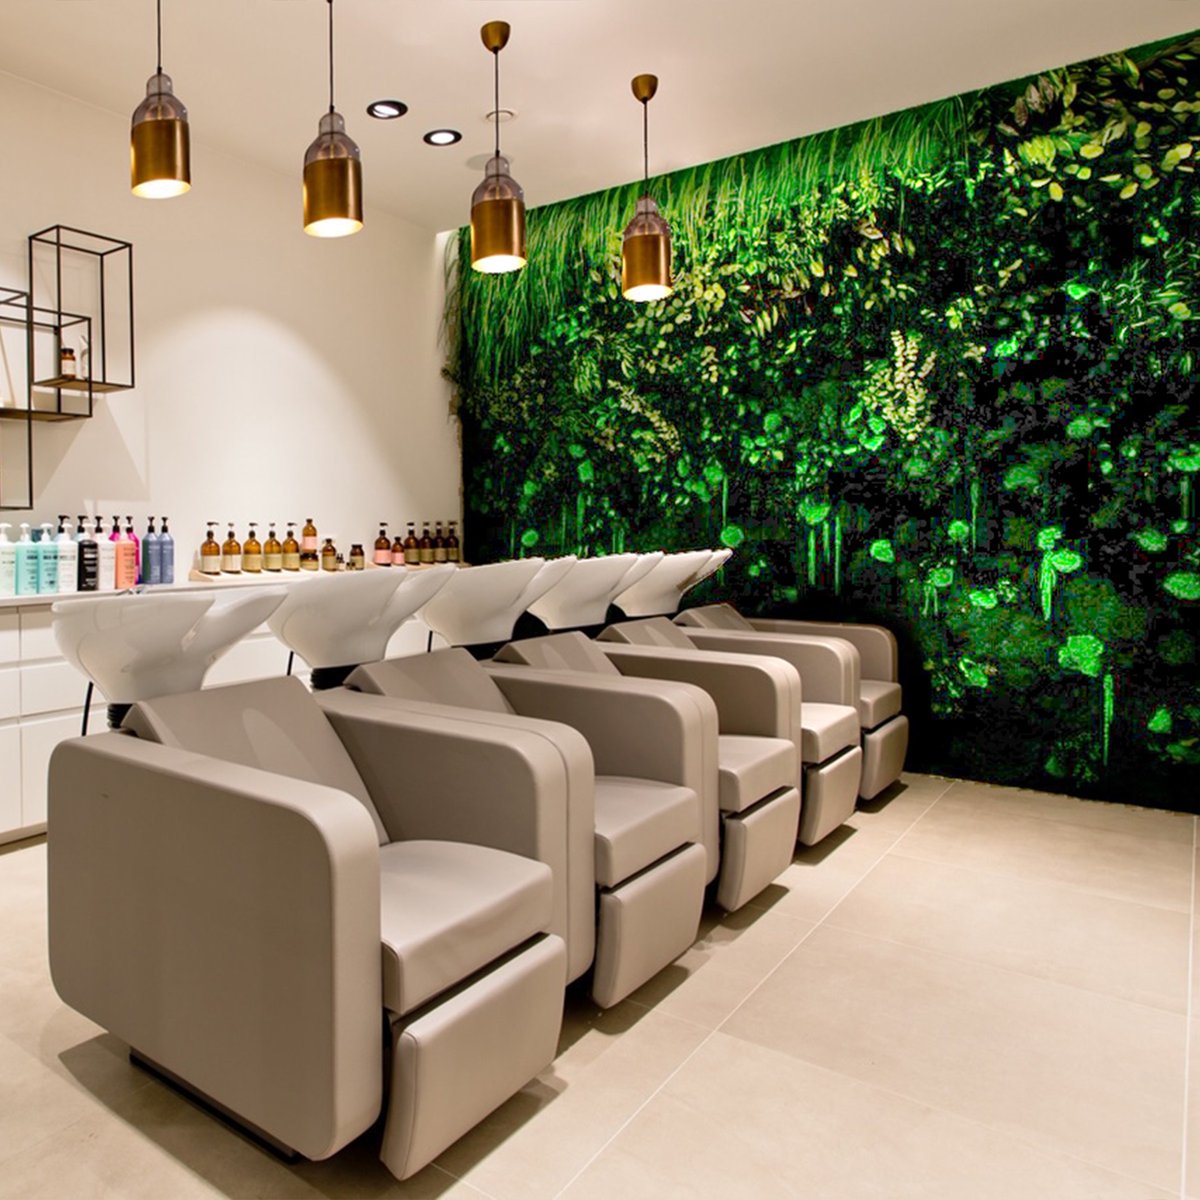 By creating a cosy, relaxing space for your customers, they will enjoy fully the experience and be more likely to come back to you the next time. 🌿

#acousticdesign #interiordesign #naturelovers #workspaceinspiration #greendesign #officedesign #hospitaldesign #beautysalon